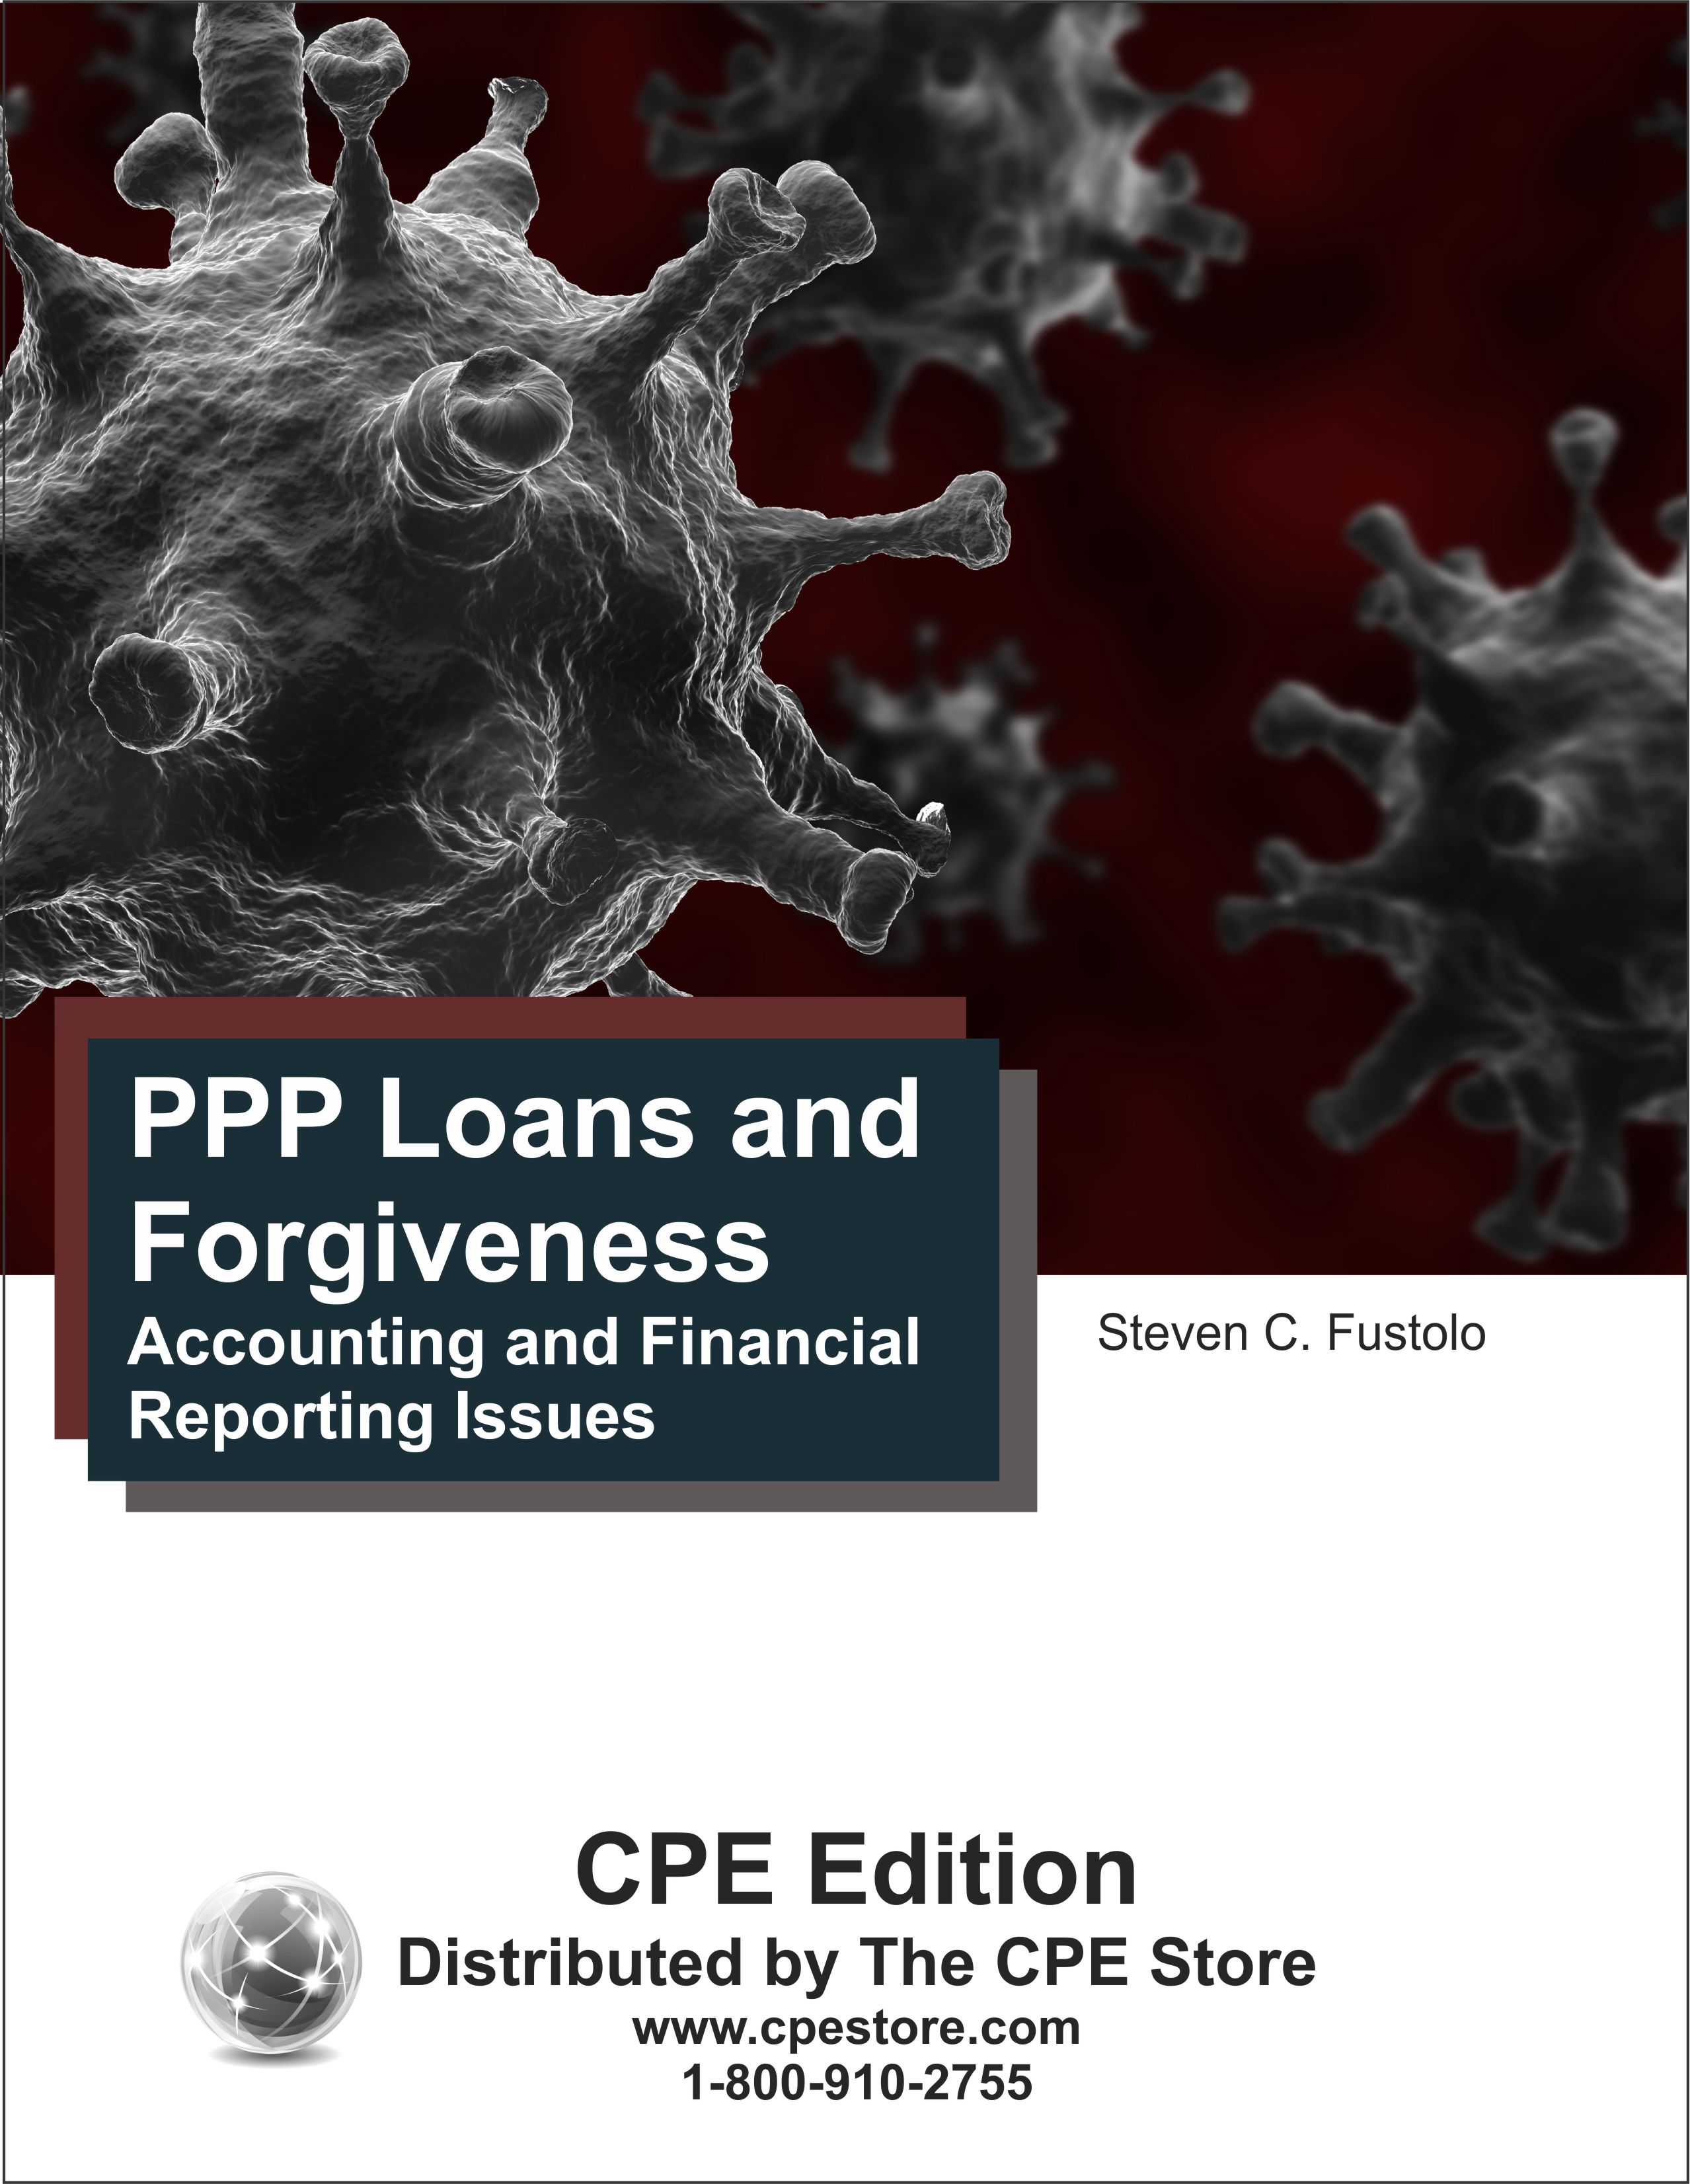 PPP Loans and Forgiveness